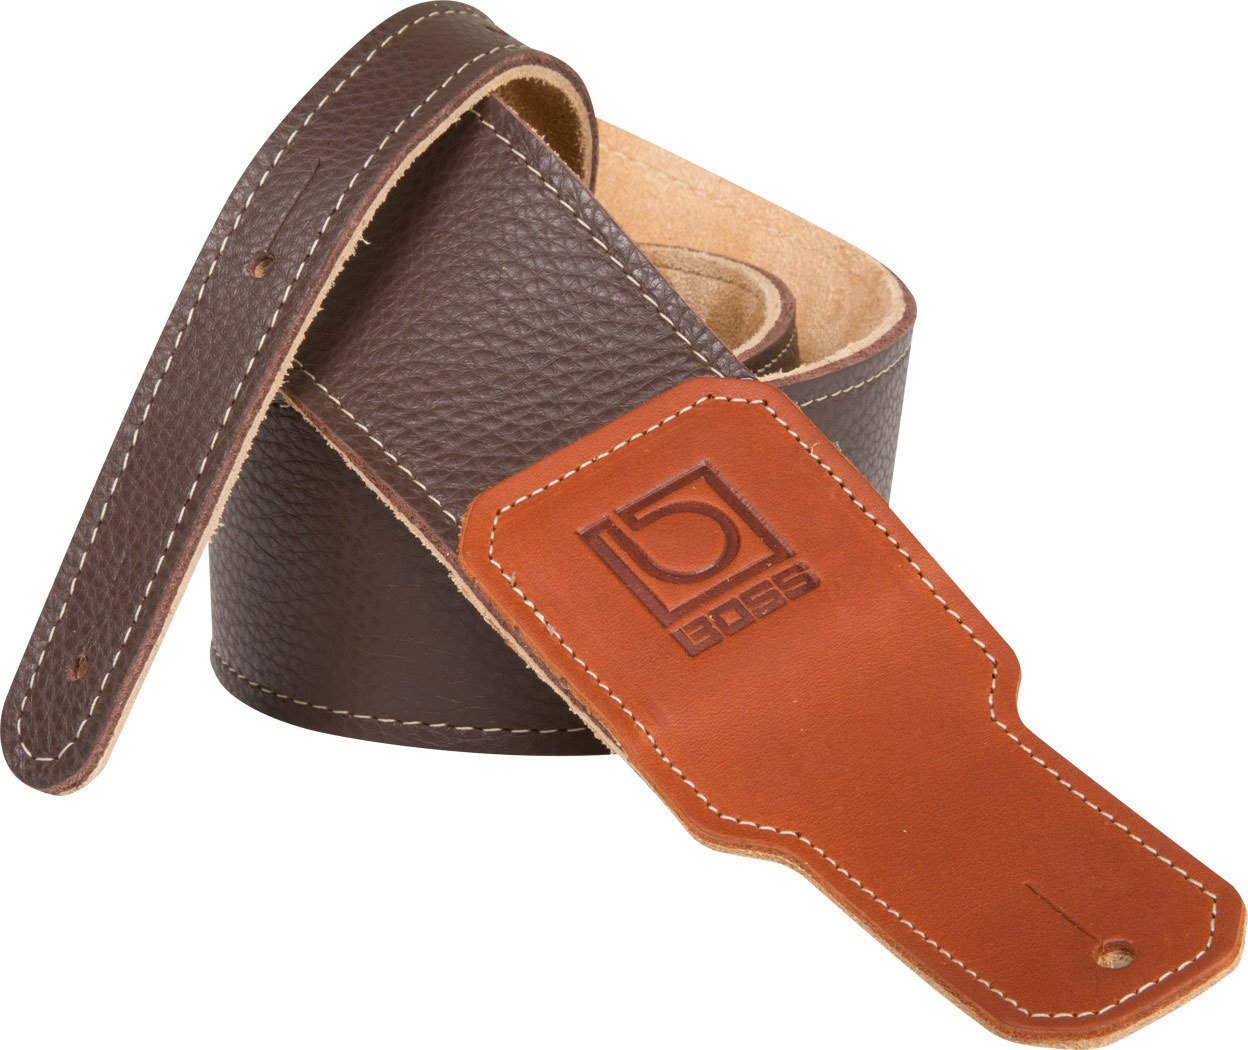 Leather guitar strap Boss BSL-25-BRN Leather guitar strap Brown